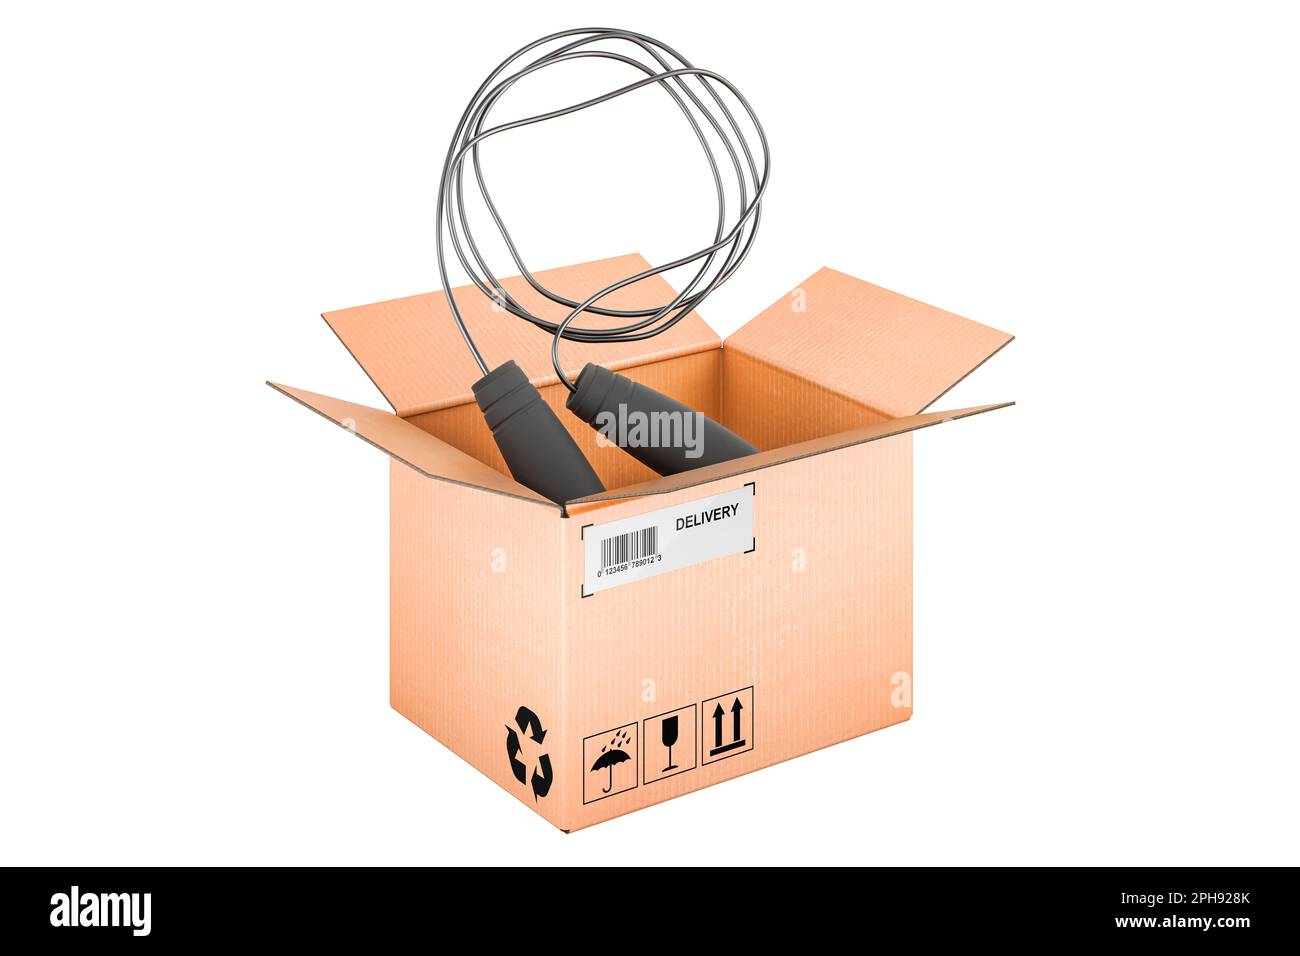 Skipping rope or jump rope inside cardboard box, delivery concept. 3D rendering isolated on white background Stock Photo